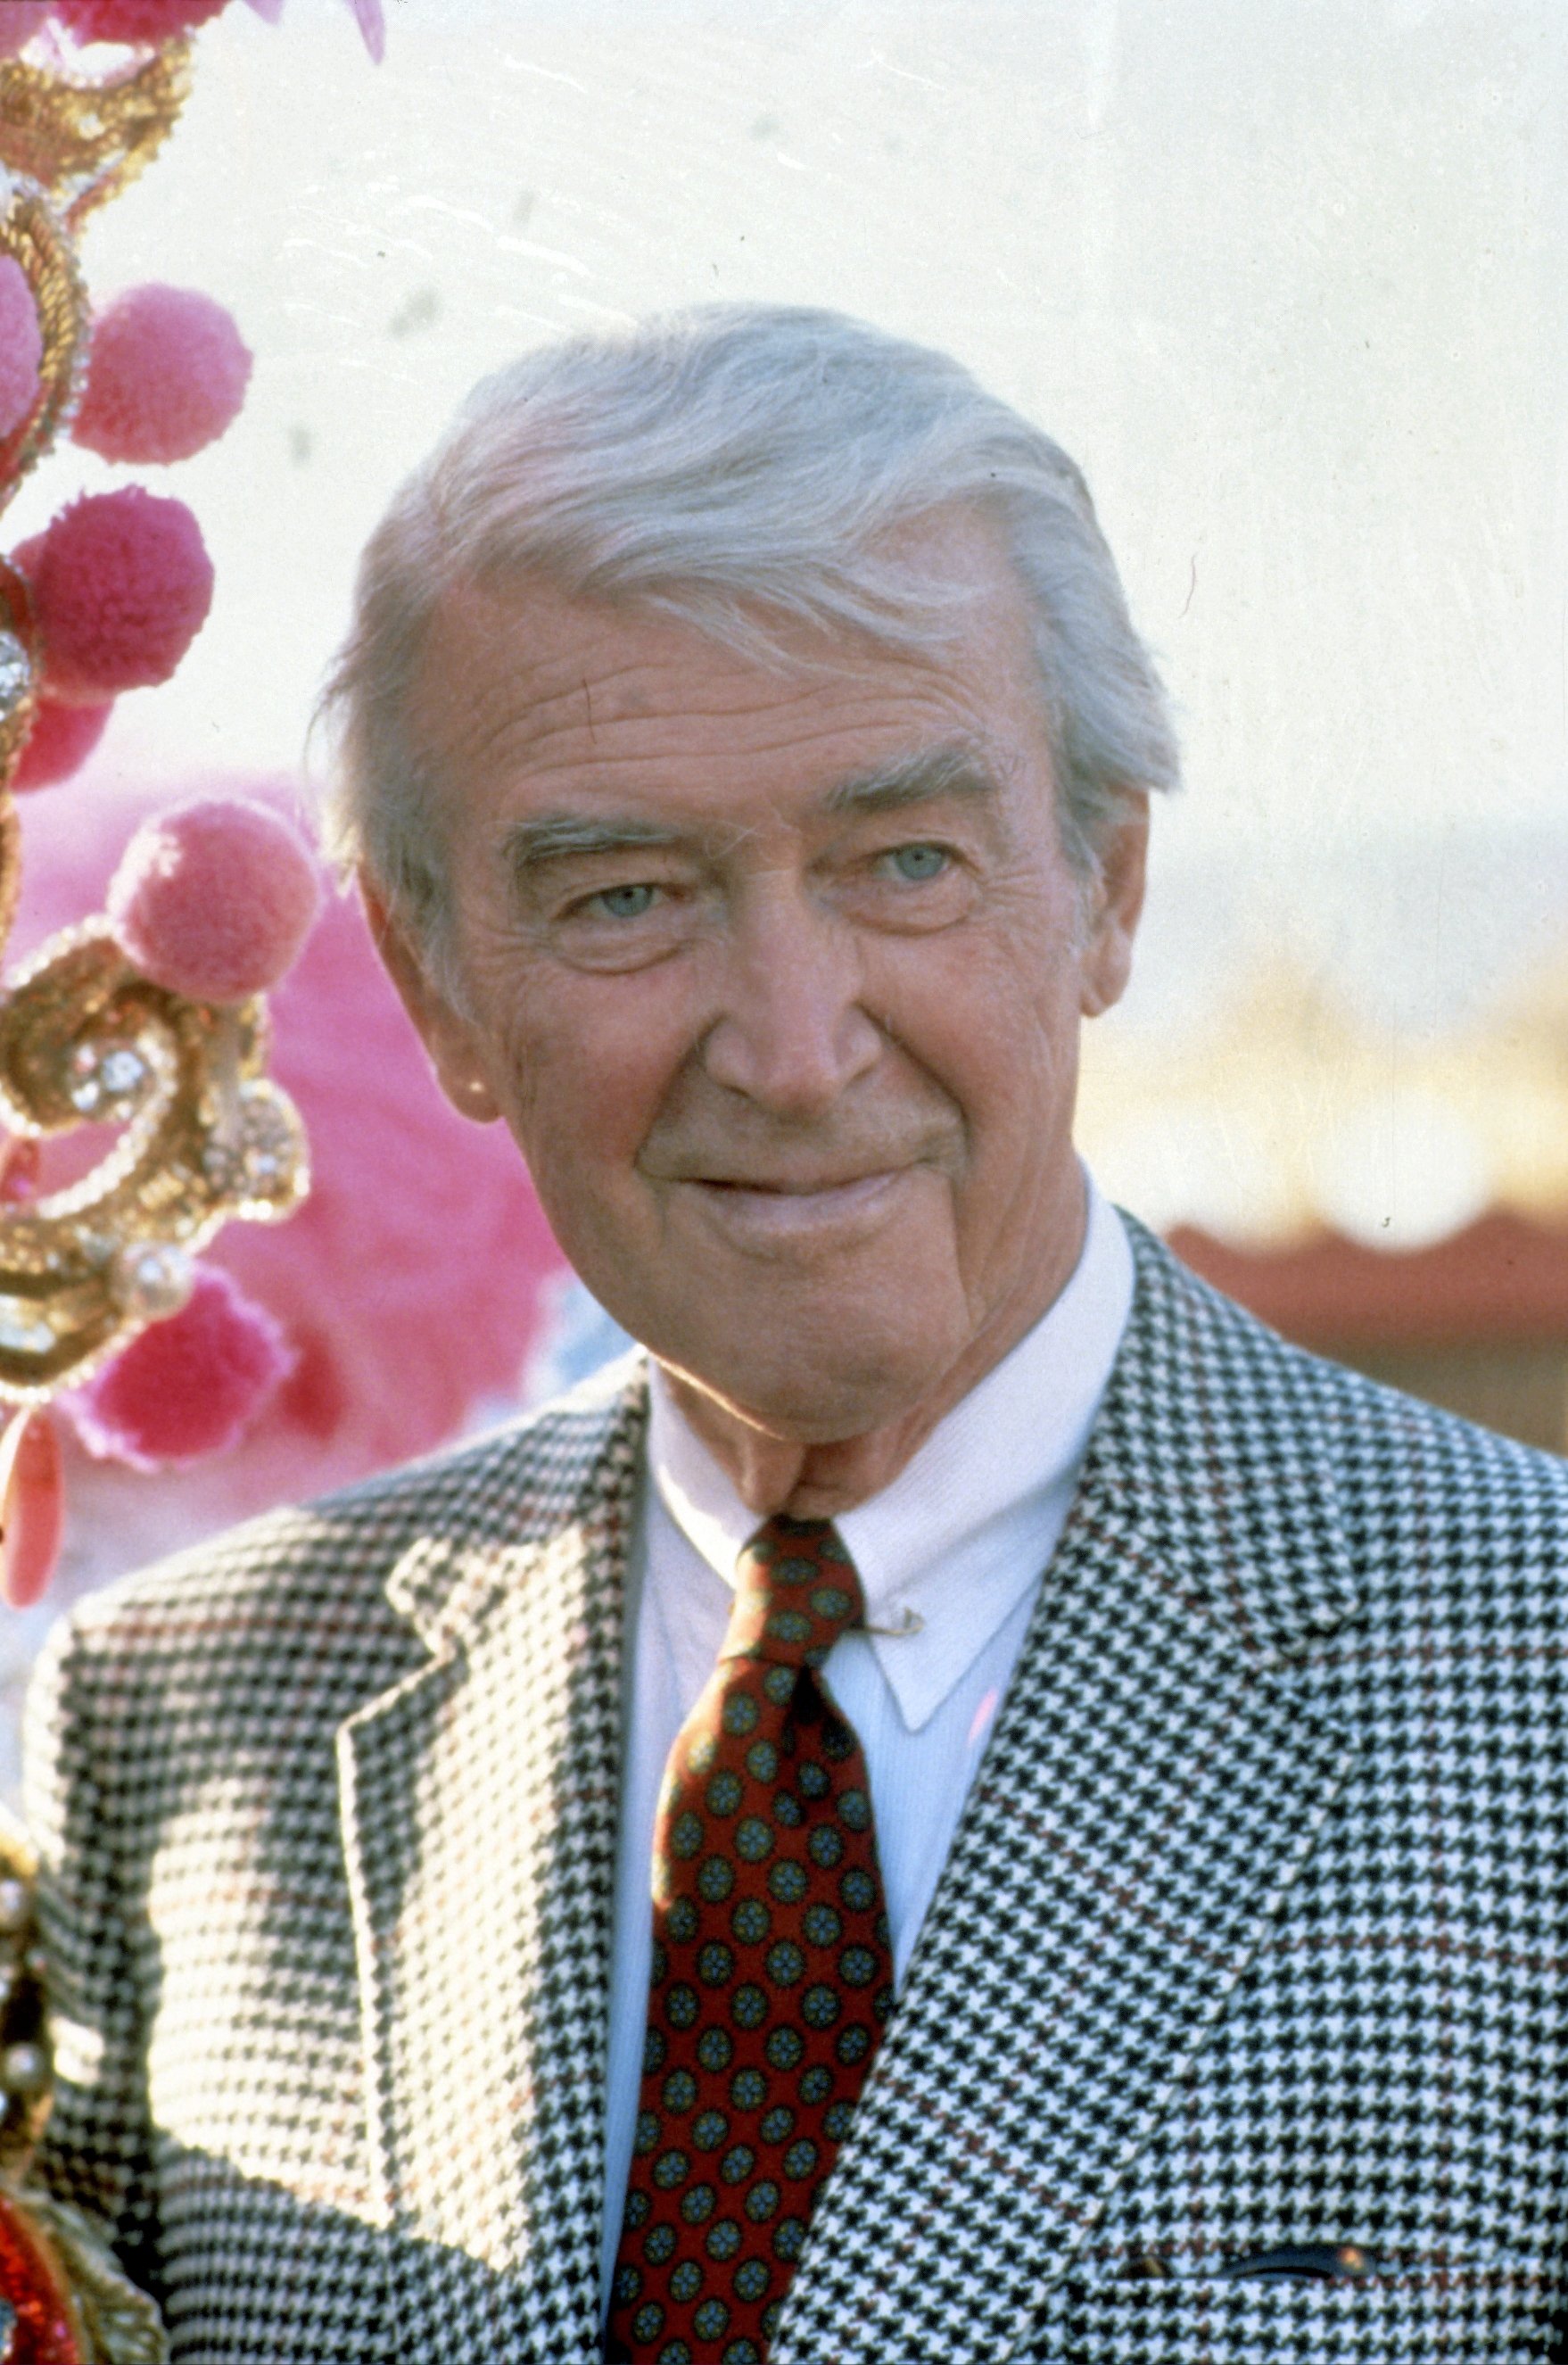 Jimmy Stewart posing for a photo in New York, circa 1980. | Source: Images/Getty Images